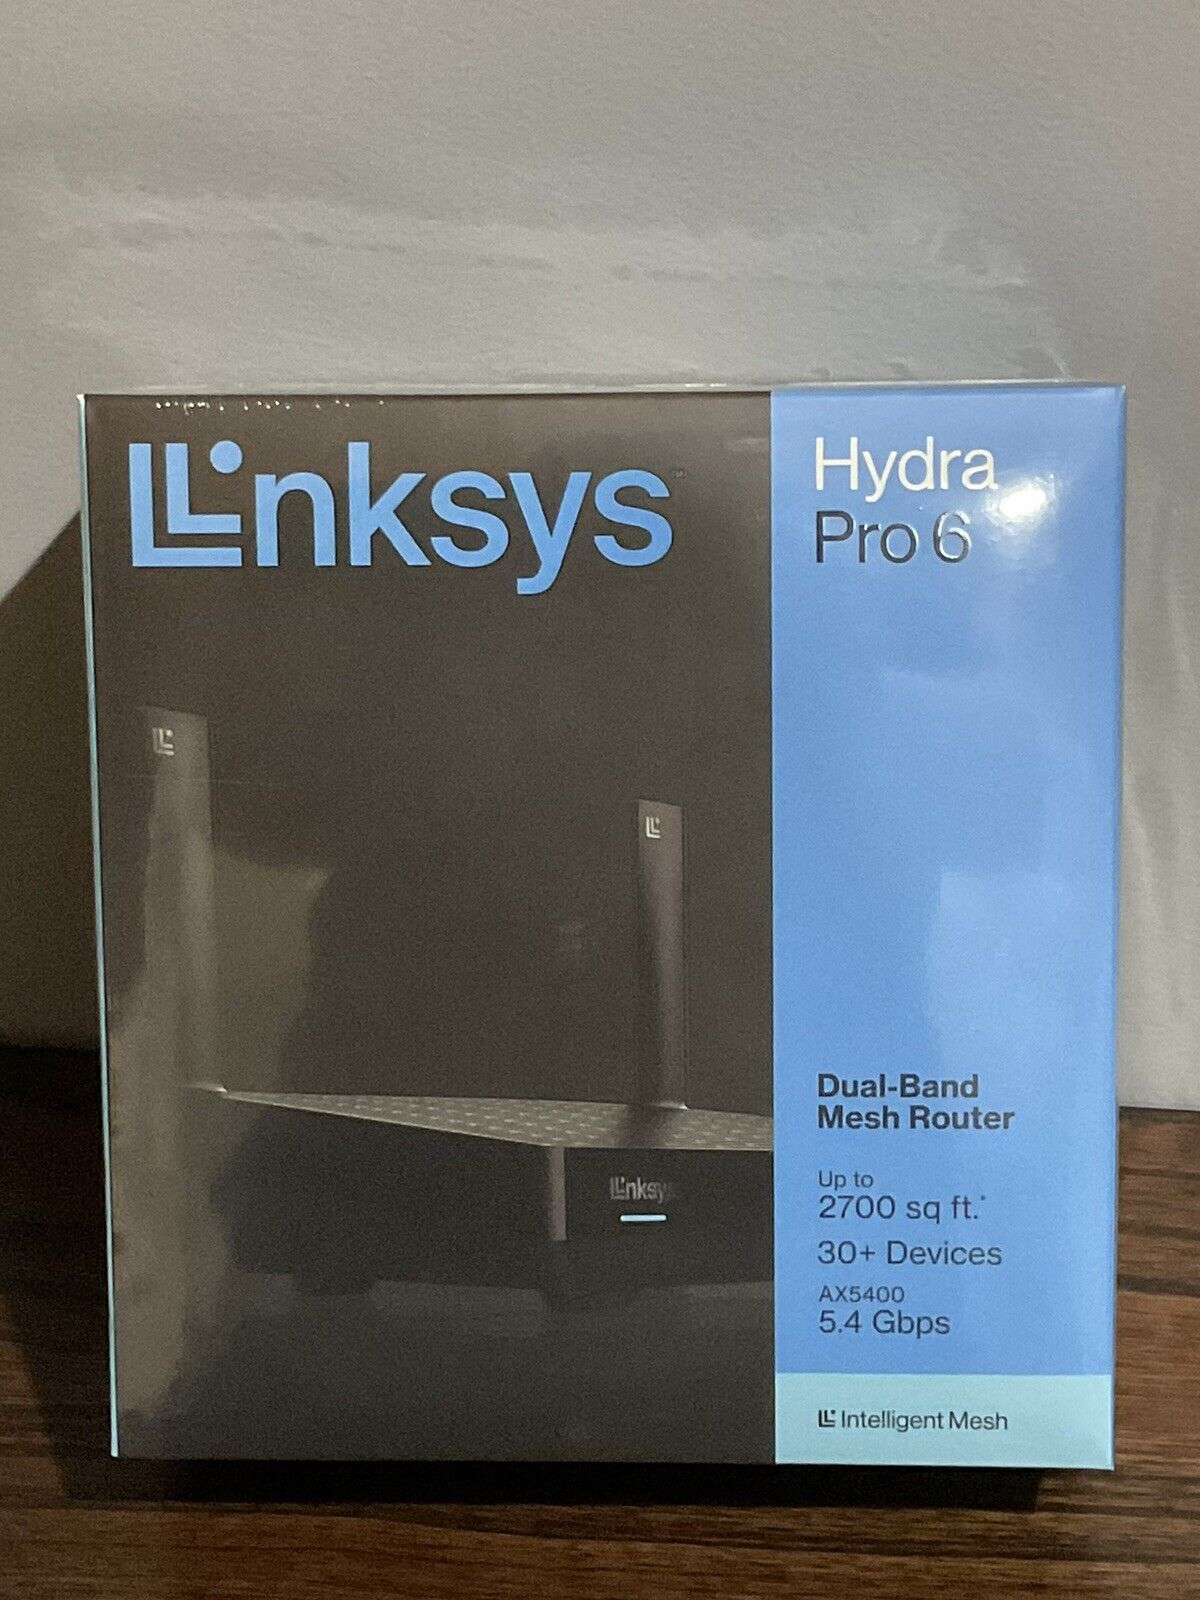 Linksys Hydra Pro 6 WiFi 6 Router Dual-Band Mesh Wireless Router AX5400 Fast SHP